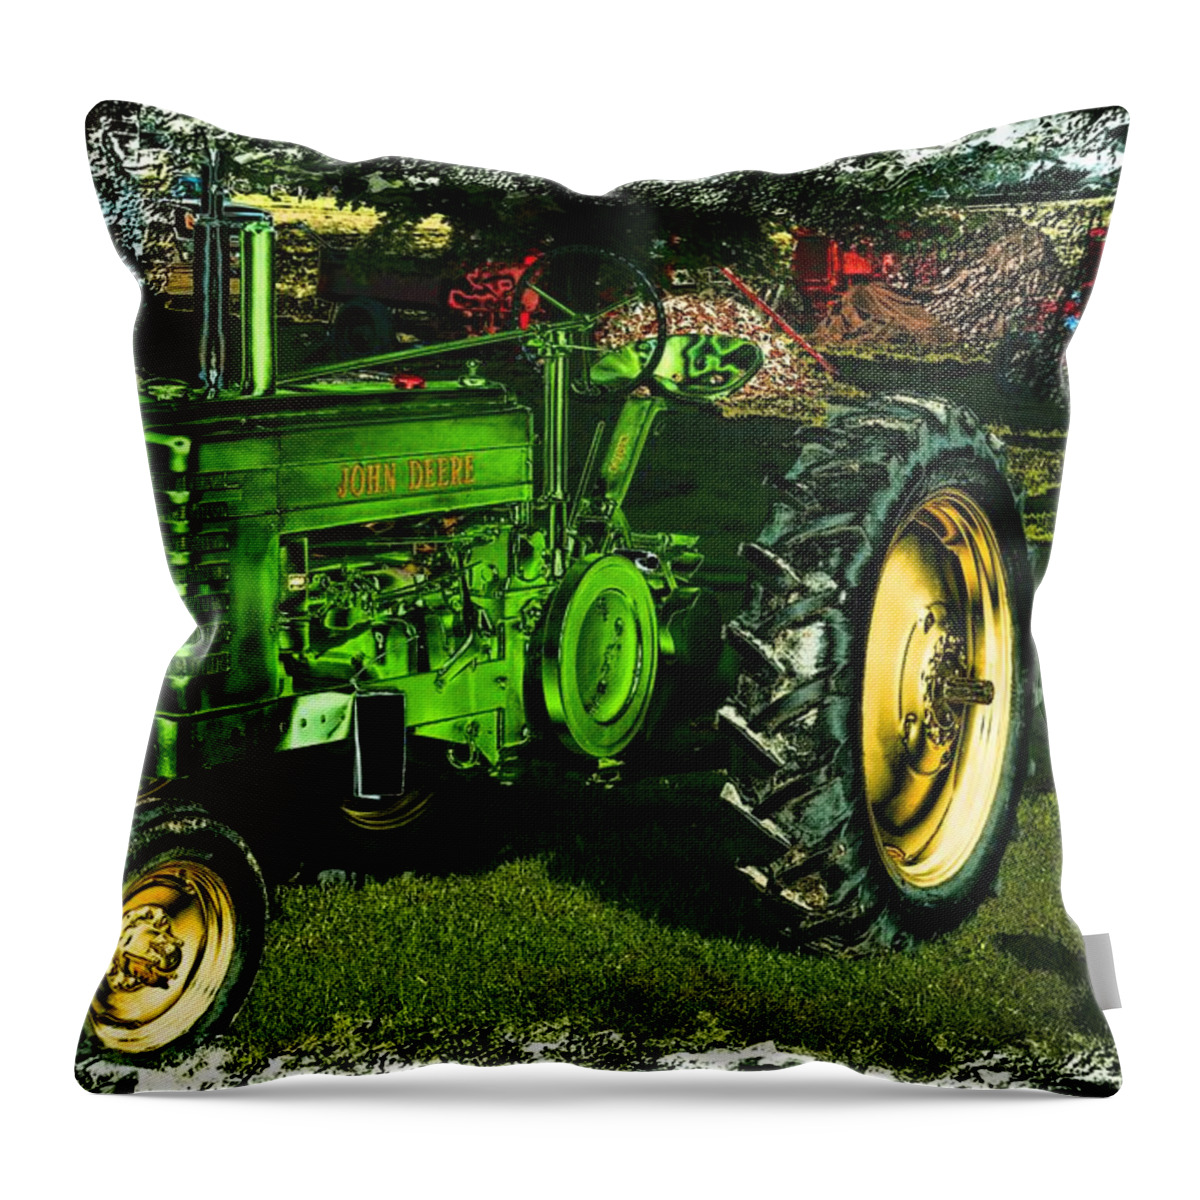 Tractor Throw Pillow featuring the photograph John Deere by Bonfire Photography